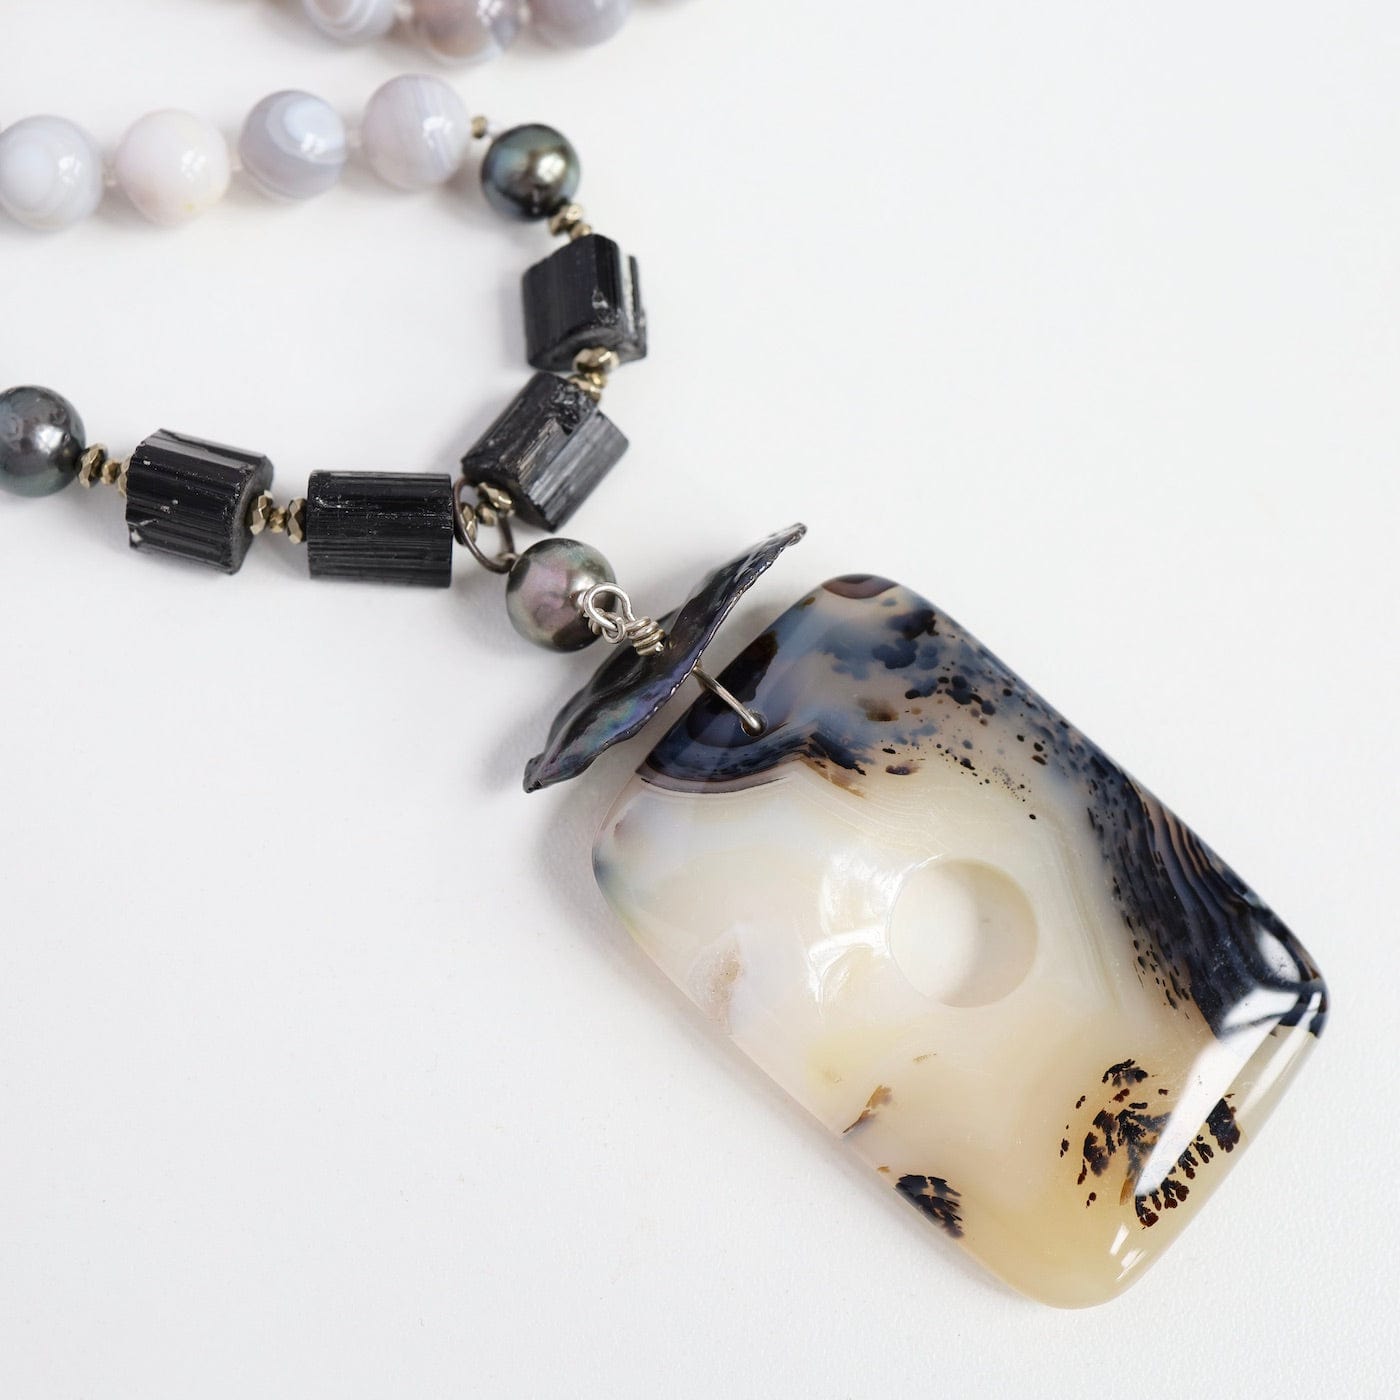 NKL Grey Agate & Black Tourmaline with Dendritic Agate Necklace